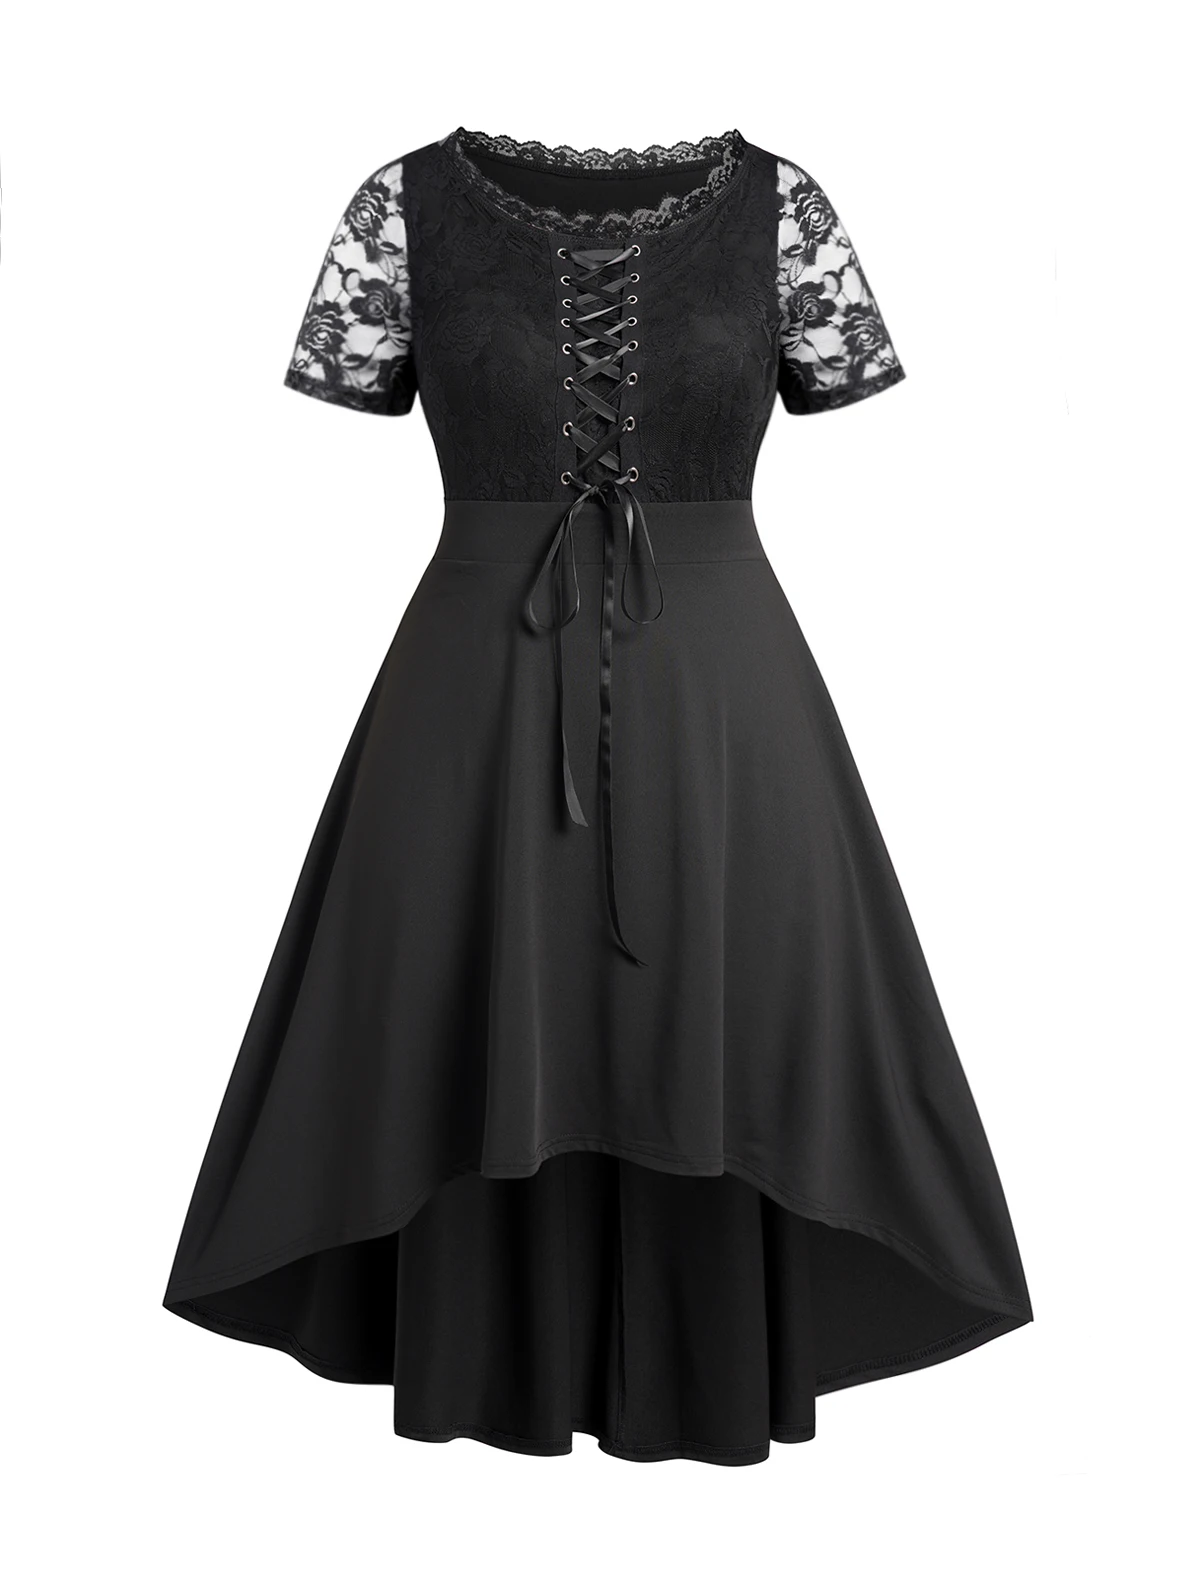 

Dressfo Black Color Plus Size Dress For Lady Sheer Lace Panel Scalloped Lace Up High Waisted A Line Midi Vestido Feminino